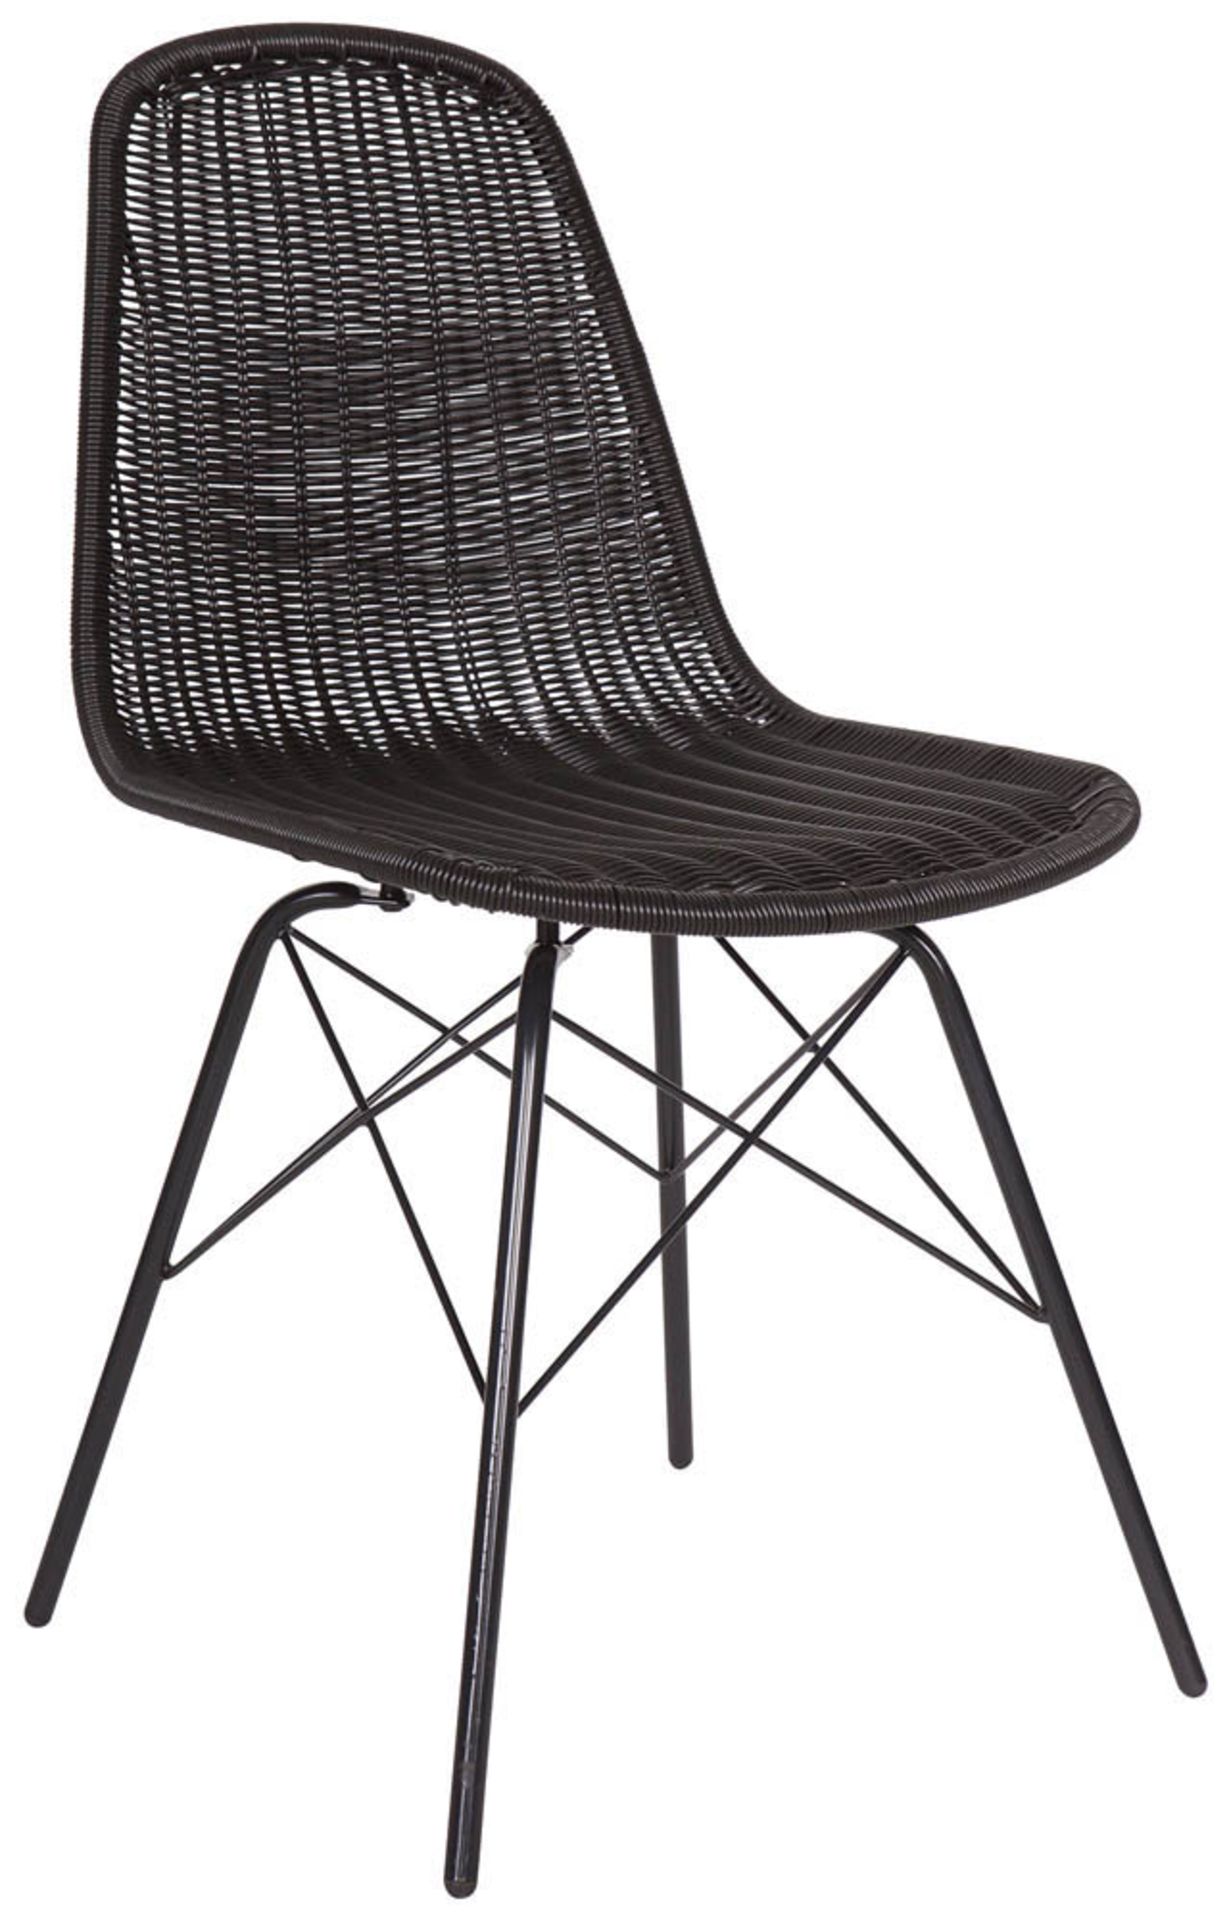 A Pair Of 'SPUN' Contemporary Rattan Chairs In Black - Brand New Boxed Stock - Dimensions: W52.5 x - Image 5 of 5